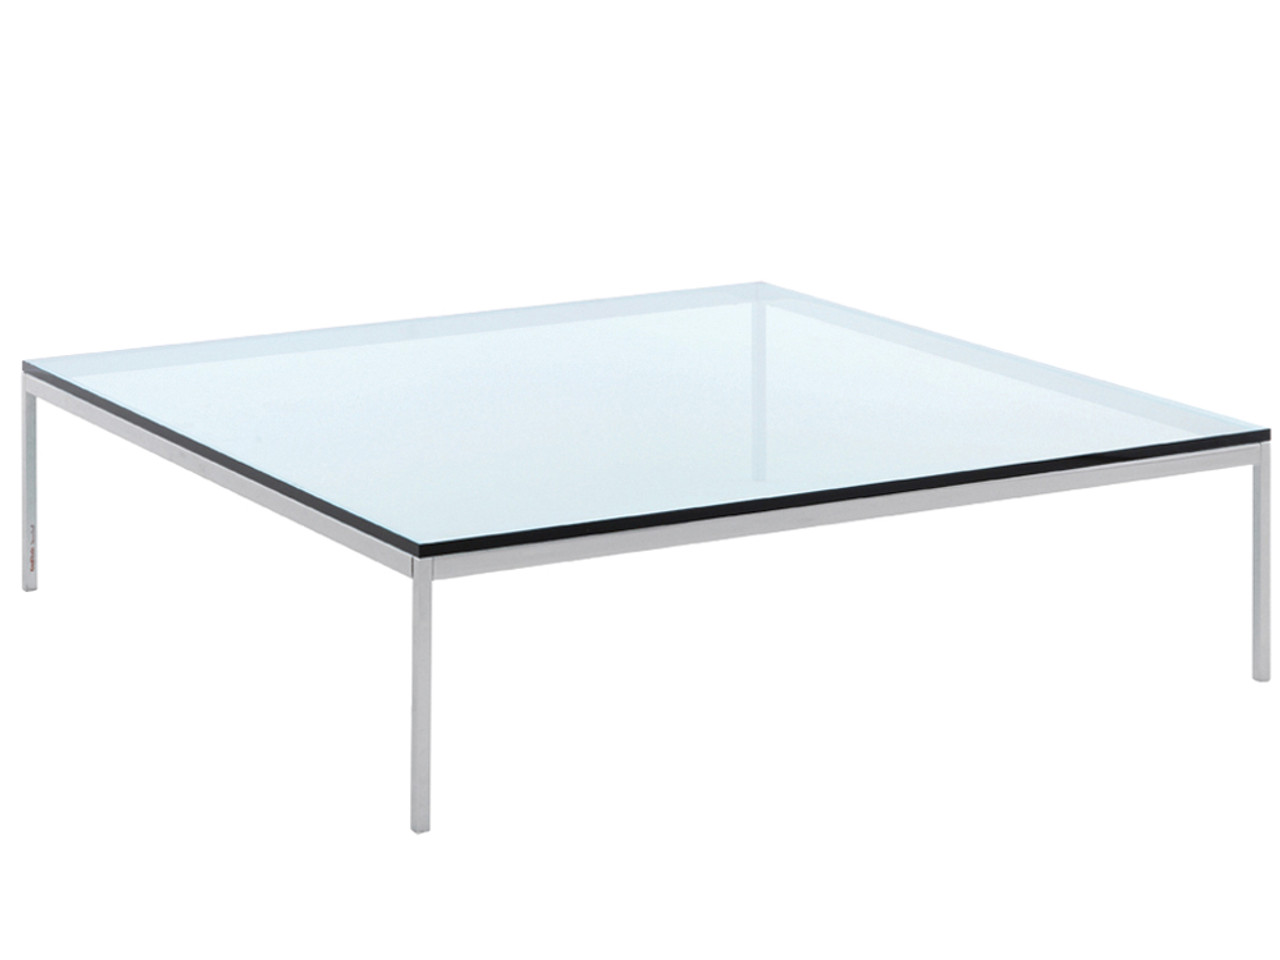 Florence Knoll Square Table by Florence Knoll